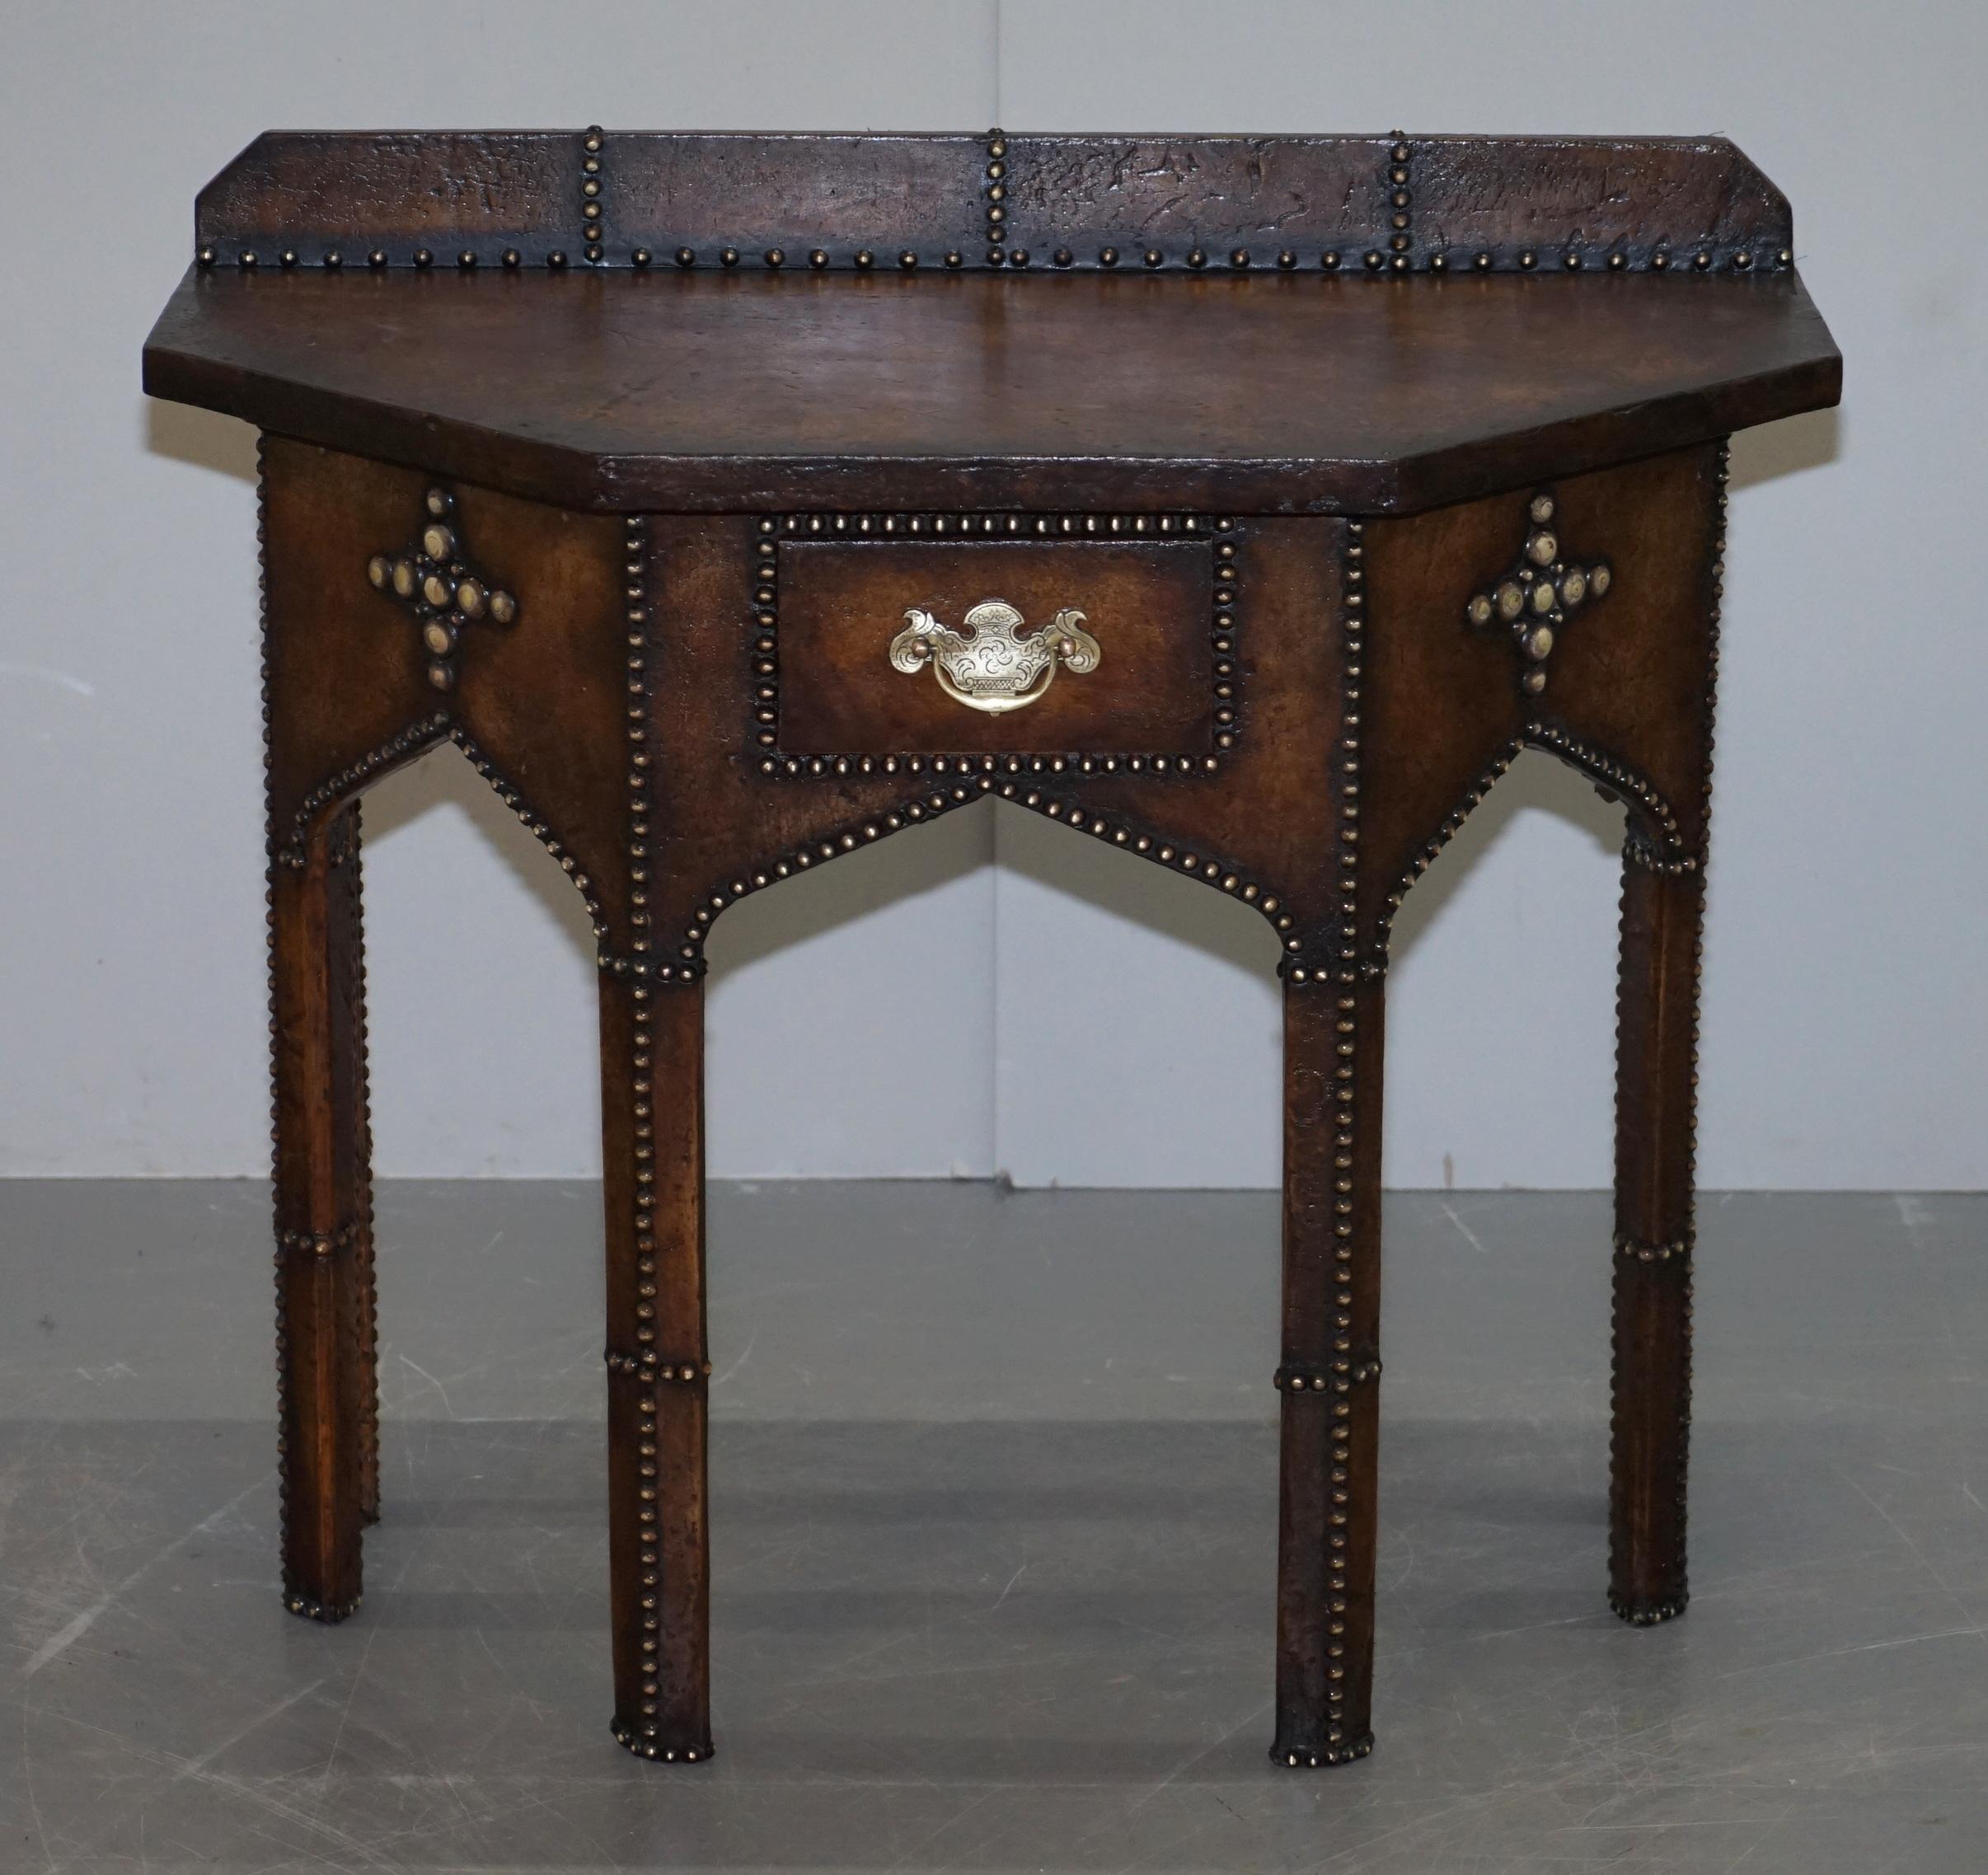 We are delighted to this absolutely stunning one of a kind Gothic Pugin style hand studded brown leather console table with single drawer

This is an exceptional piece of art furniture. It’s made in the Gothic Pugin style as mentioned, it dates to